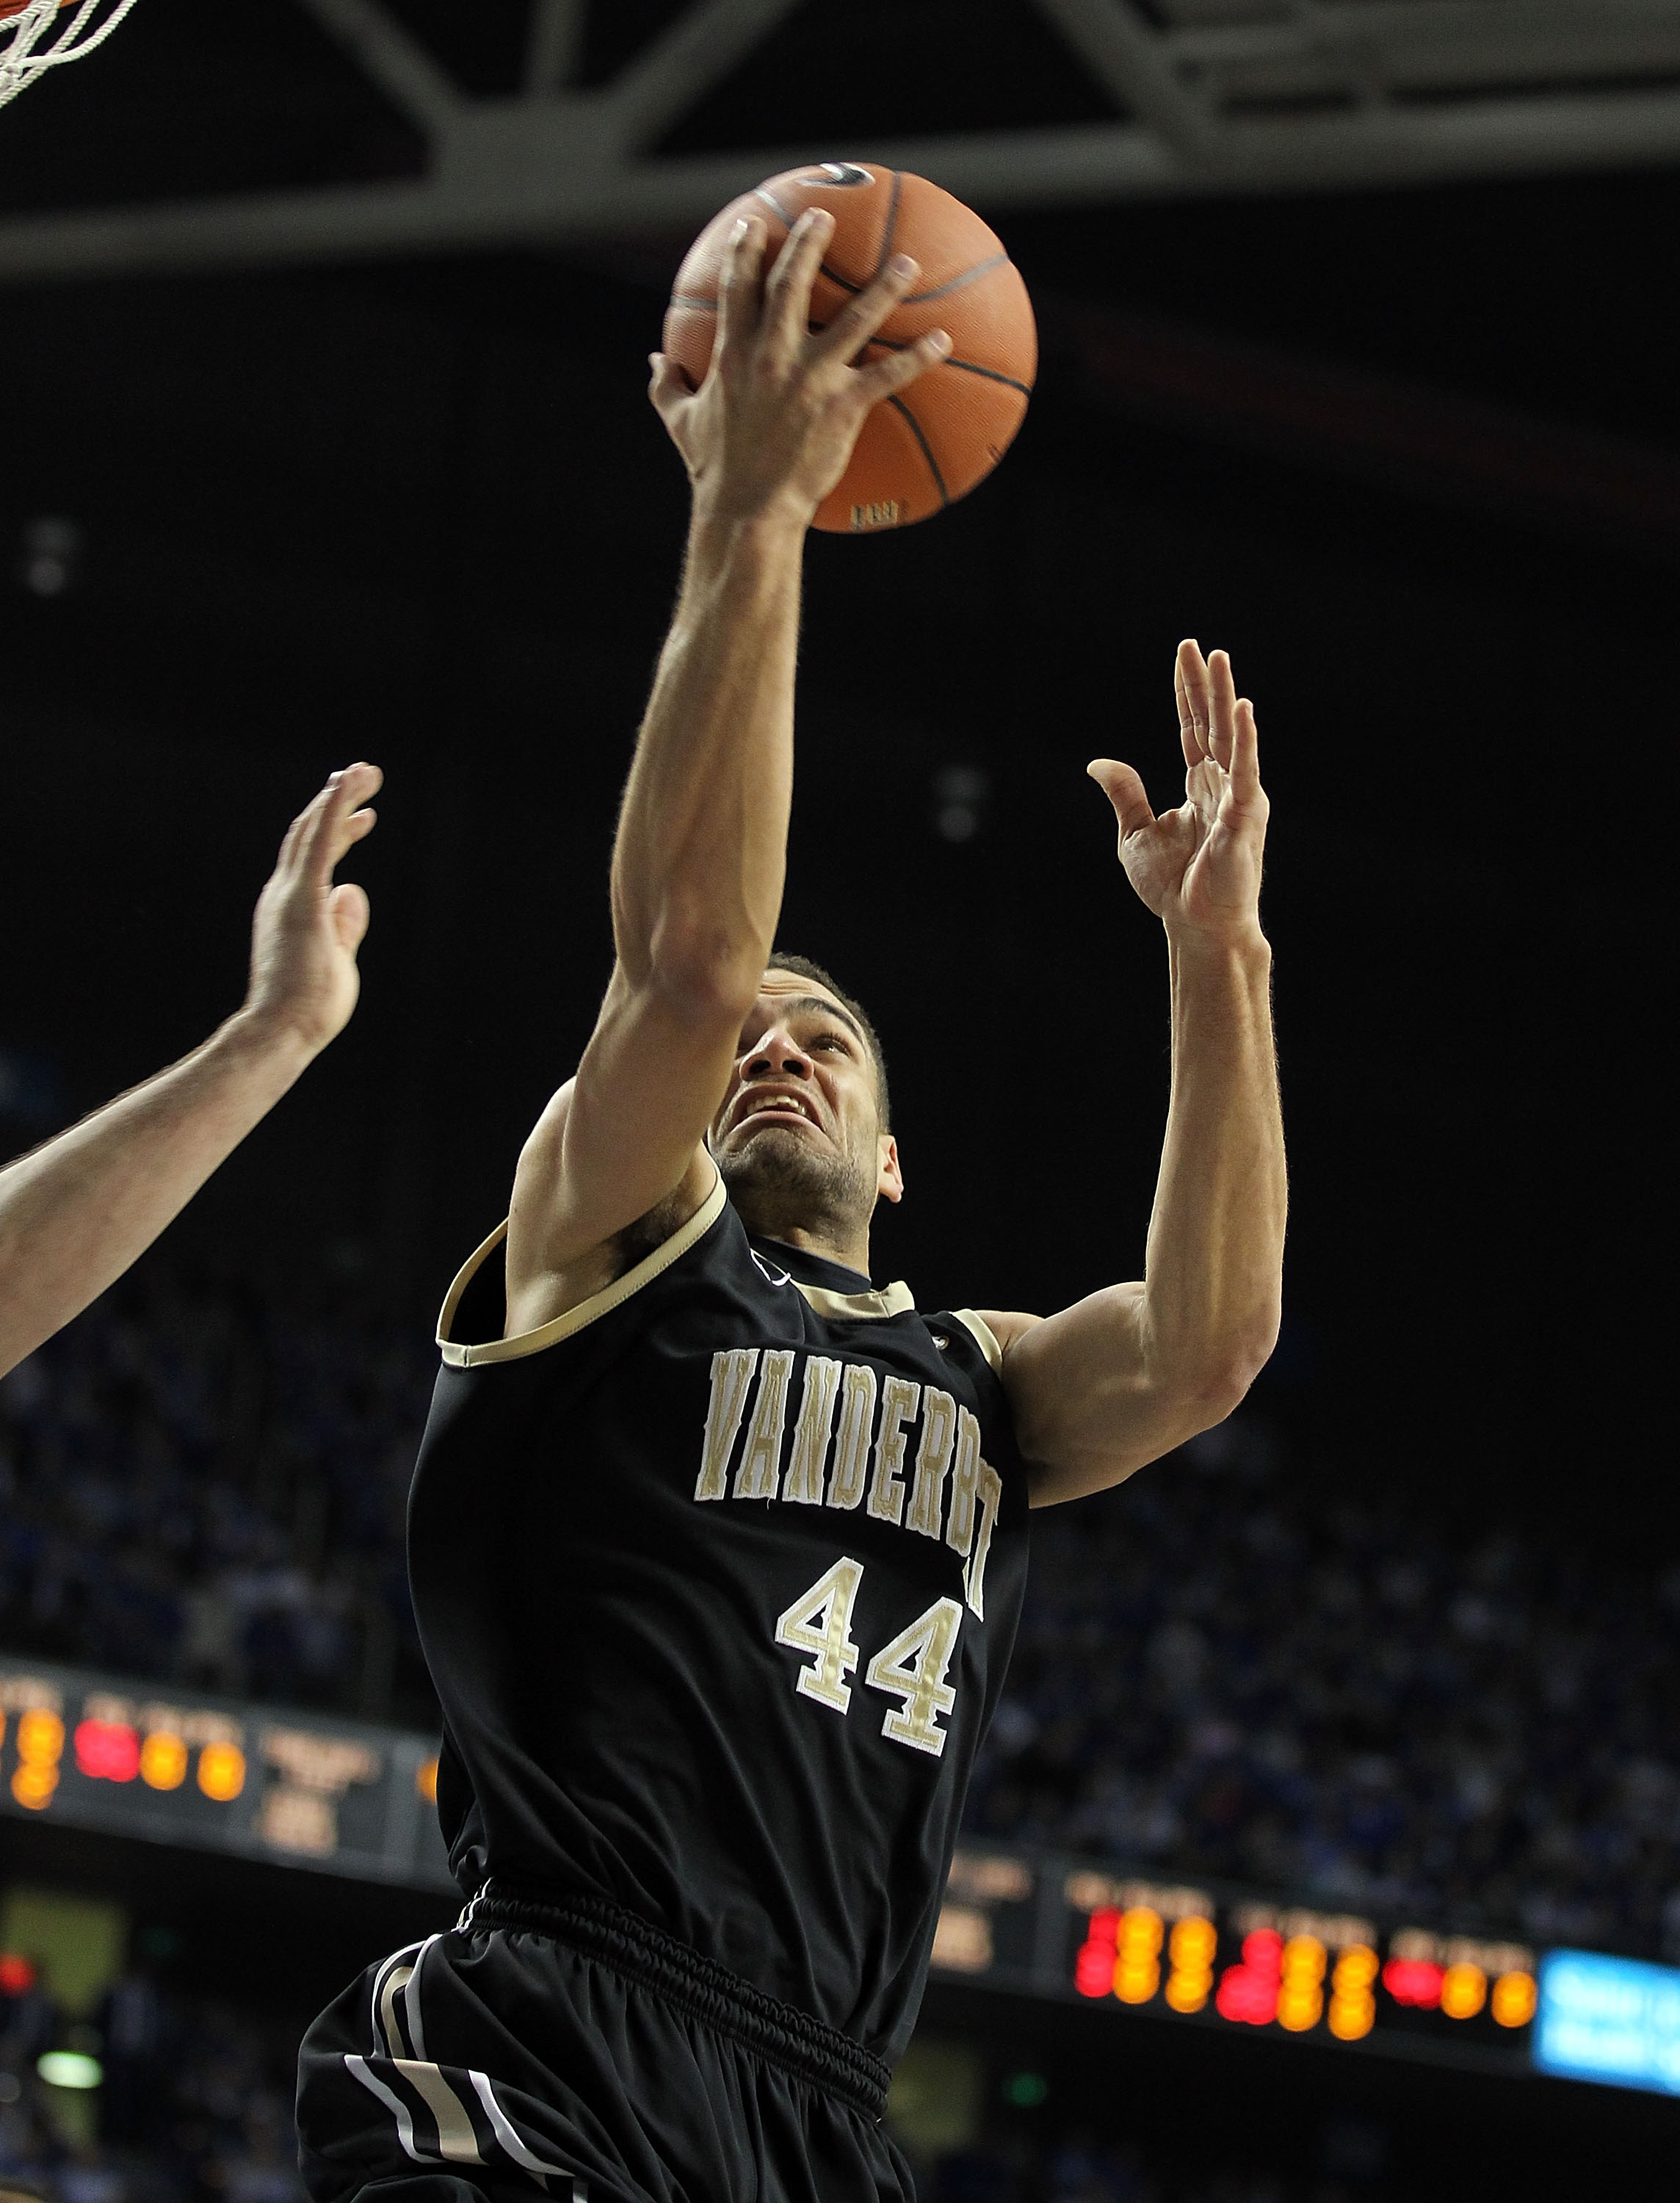 LEXINGTON, KY - MARCH 01:  Jeffery Taylor #44 of the Vanderbilt Commodores shoots the ball during the SEC game against the Kentucky Wildcats  at Rupp Arena on March 1, 2011 in Lexington, Kentucky.  (Photo by Andy Lyons/Getty Images)